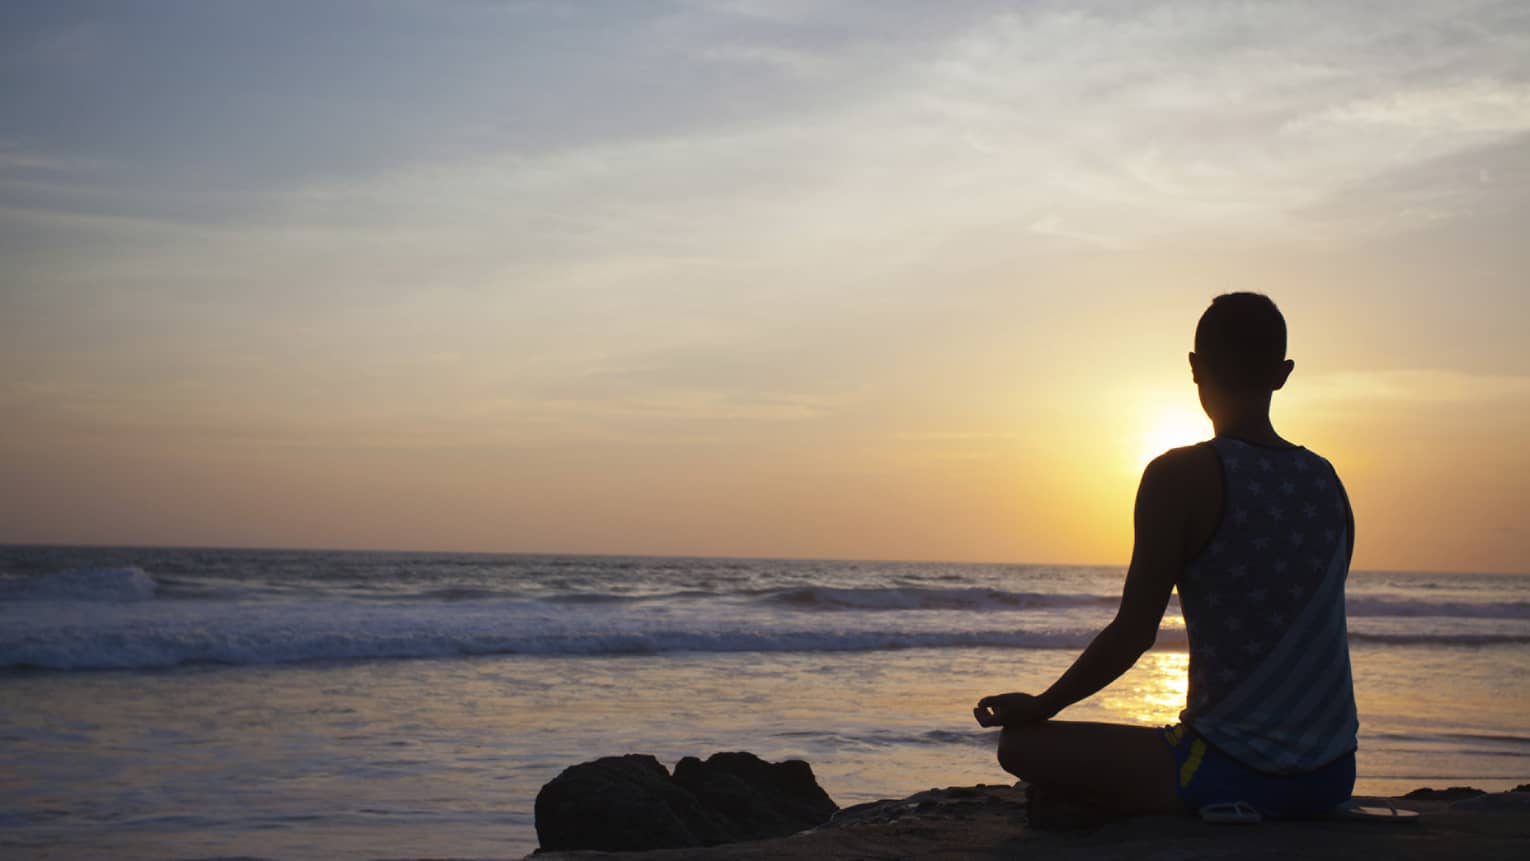 Silhouette of person sitting cross-legged, meditating in front of beach at sunset